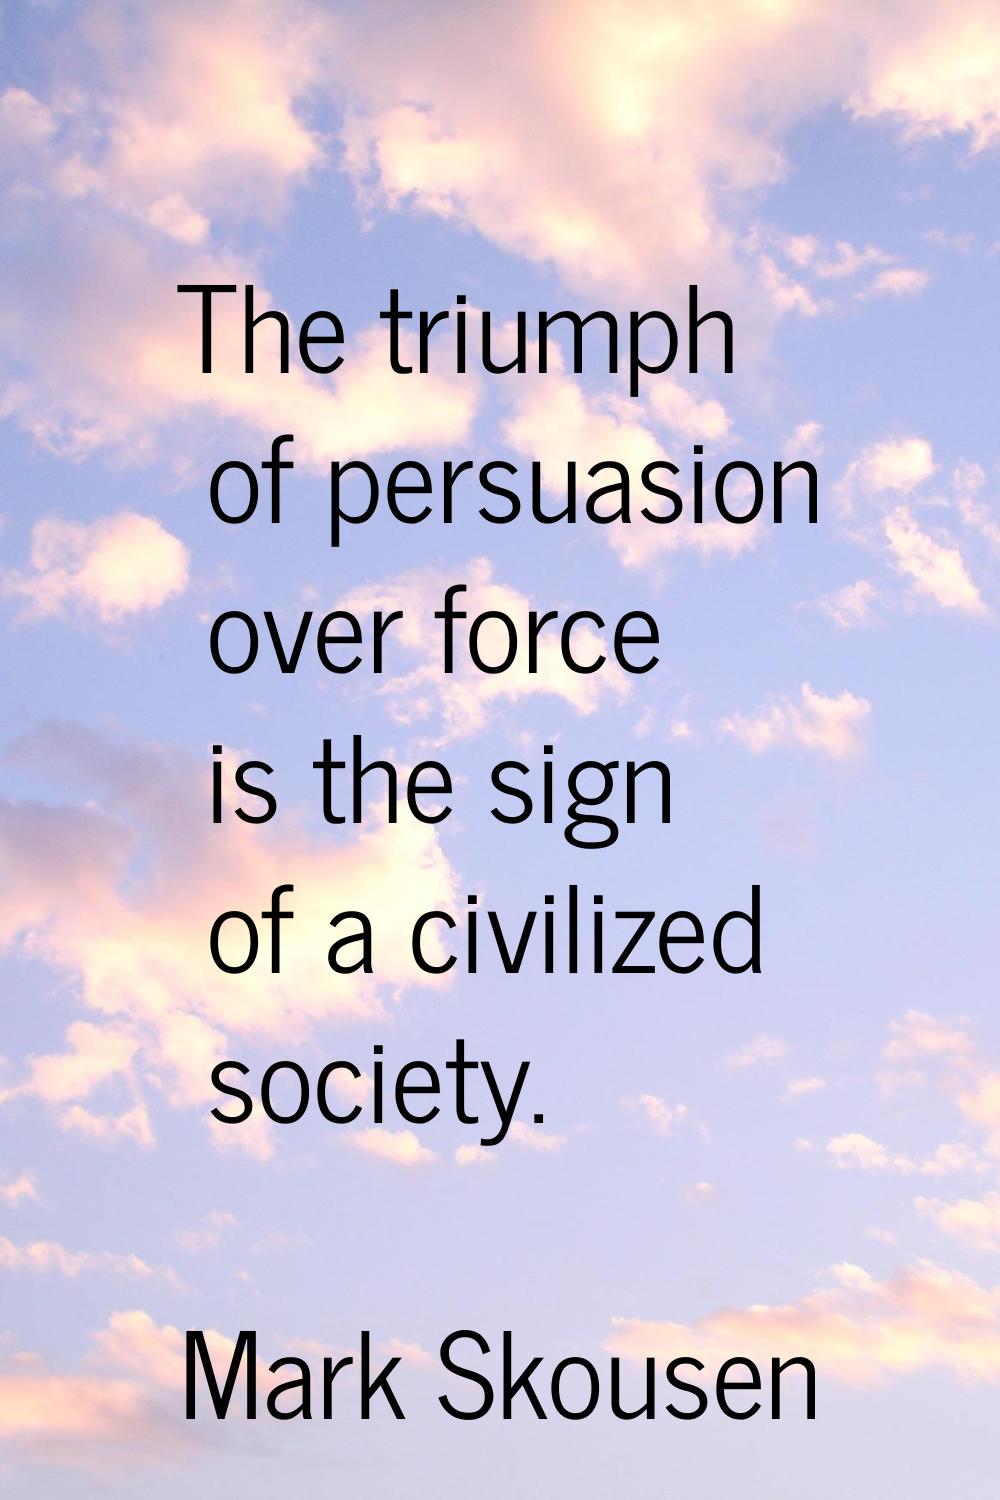 The triumph of persuasion over force is the sign of a civilized society.